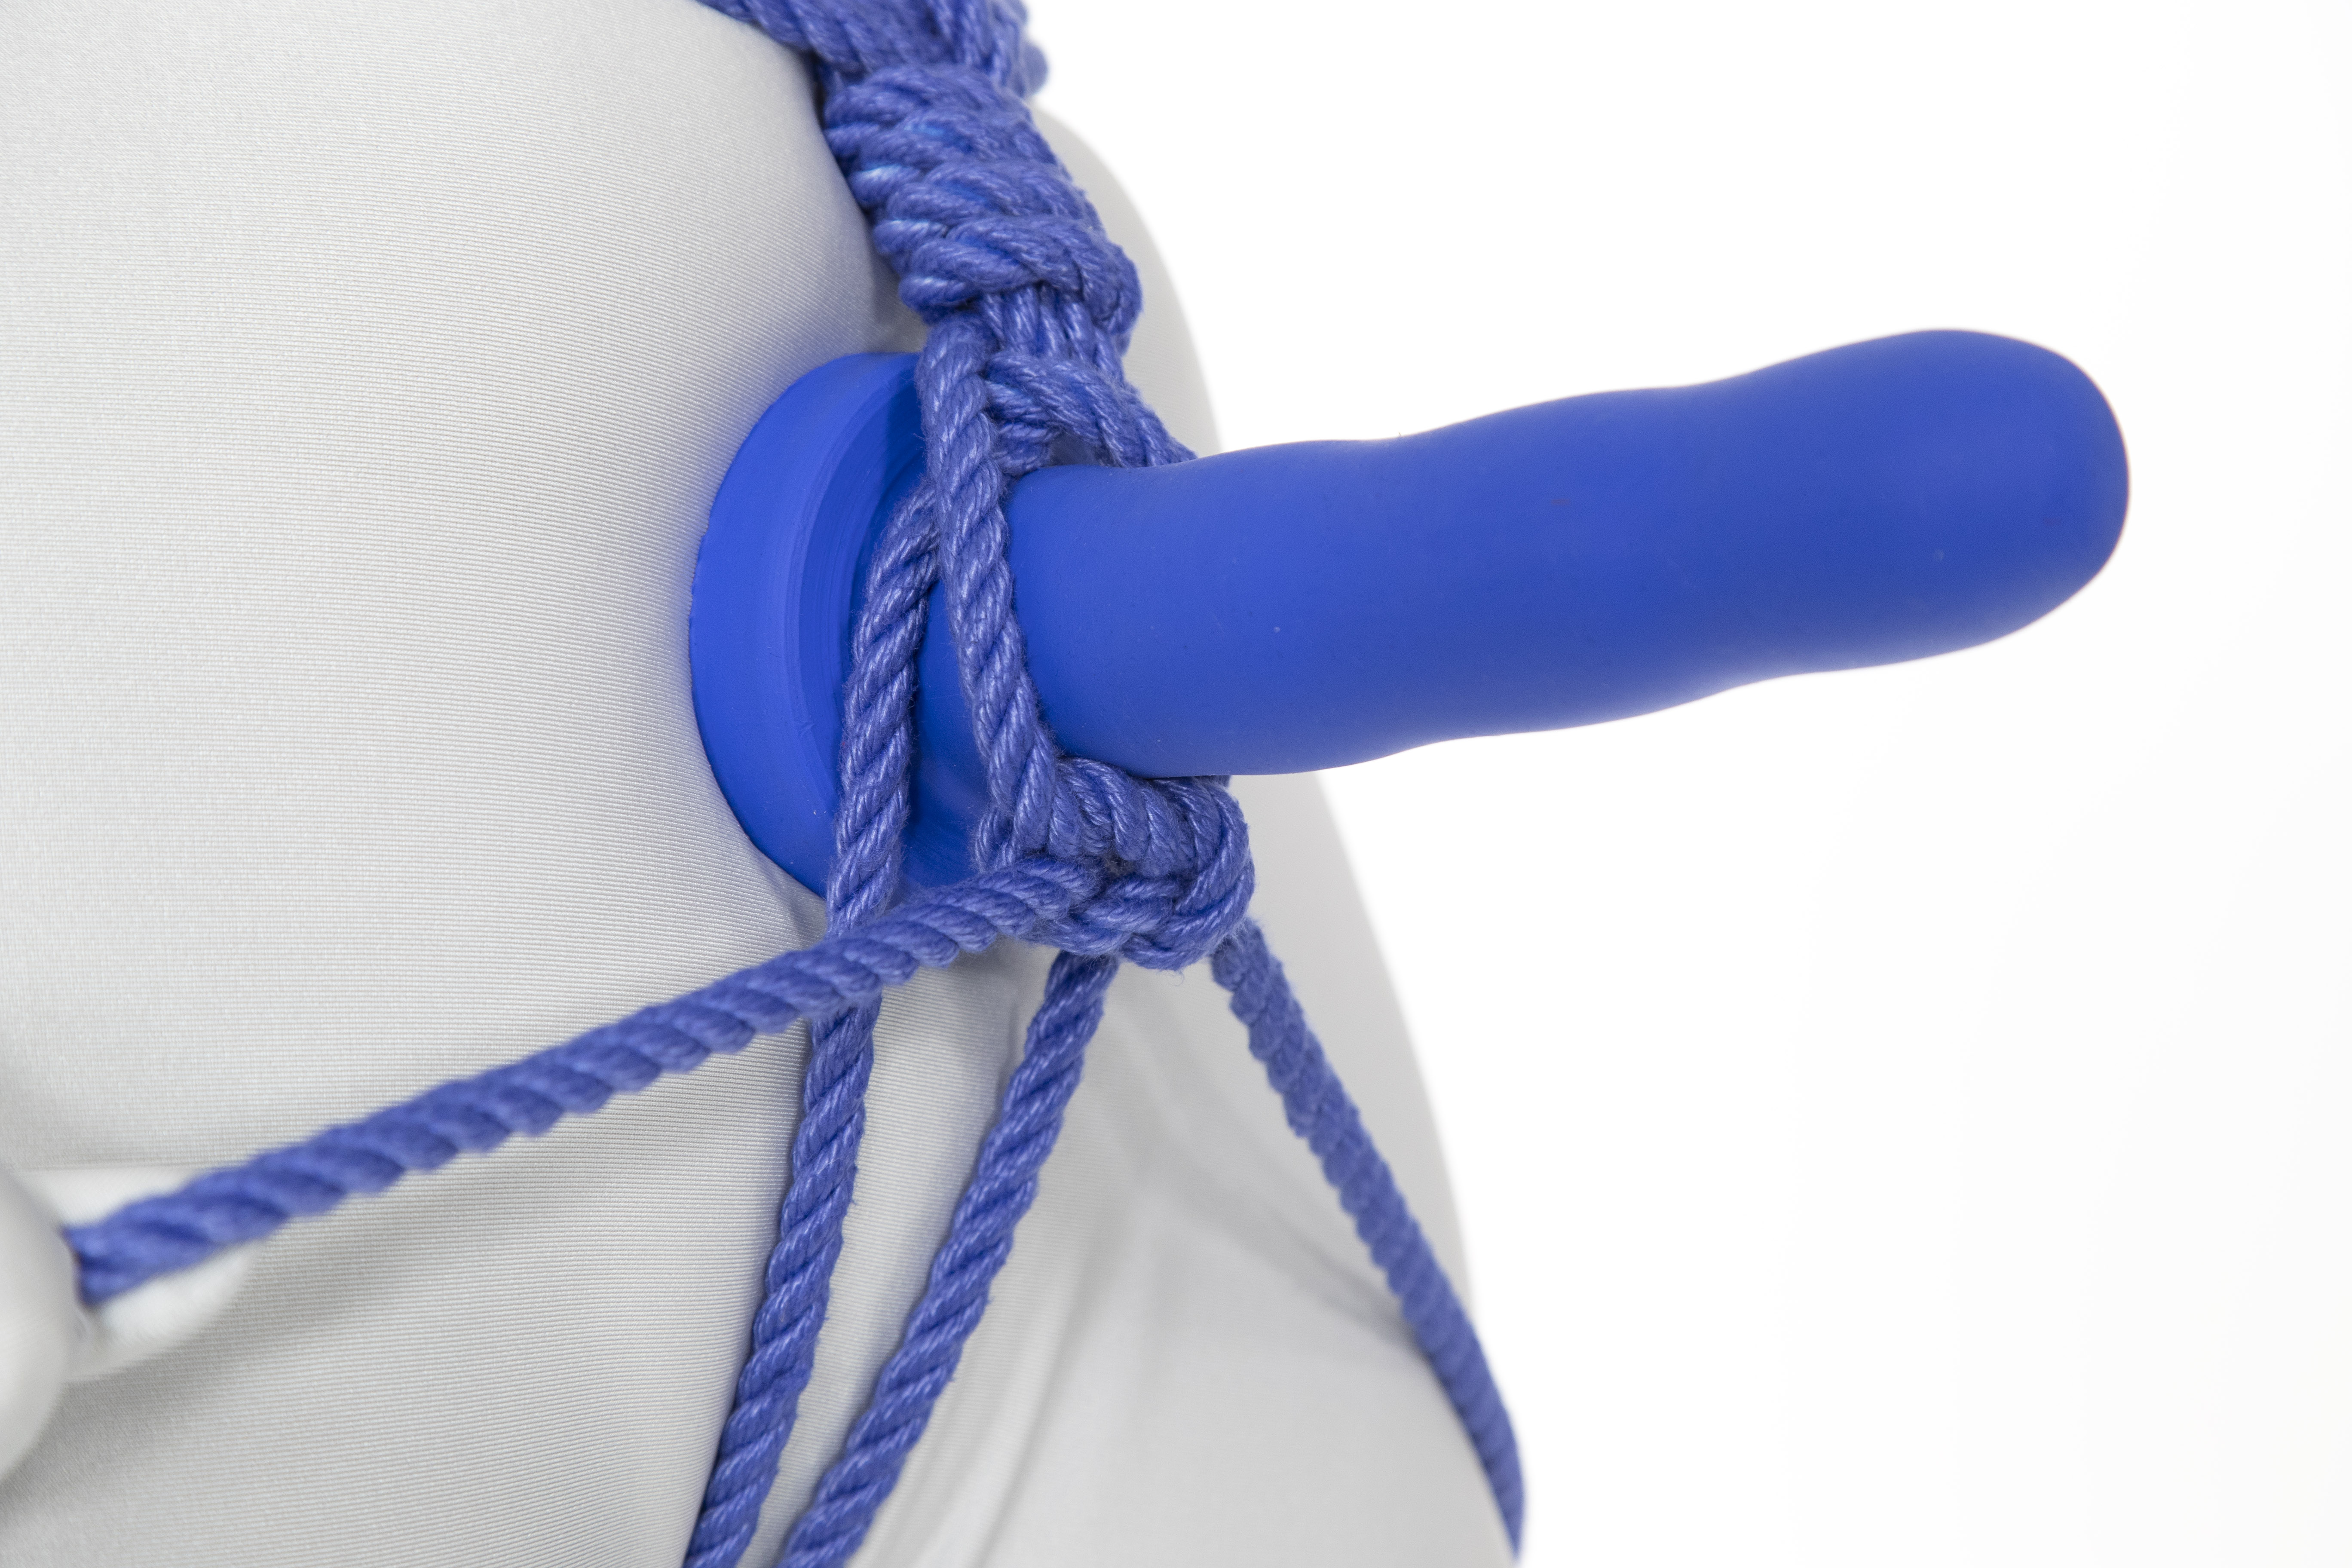 A closeup view of the crotch of a person in a white bodysuit. A blue dildo is mounted over their pubic mound, sticking straight out. A spiral of blue rope runs into the dildo from above. The ends of the rope separate and go down around either side of the dildo, holding it in place with a square knot underneath. The ends of the rope coming out of the square knot separate and pass around either side of the body. Another doubled rope comes up between the legs, separates around the dildo, and travels through the center of the rope spiral.